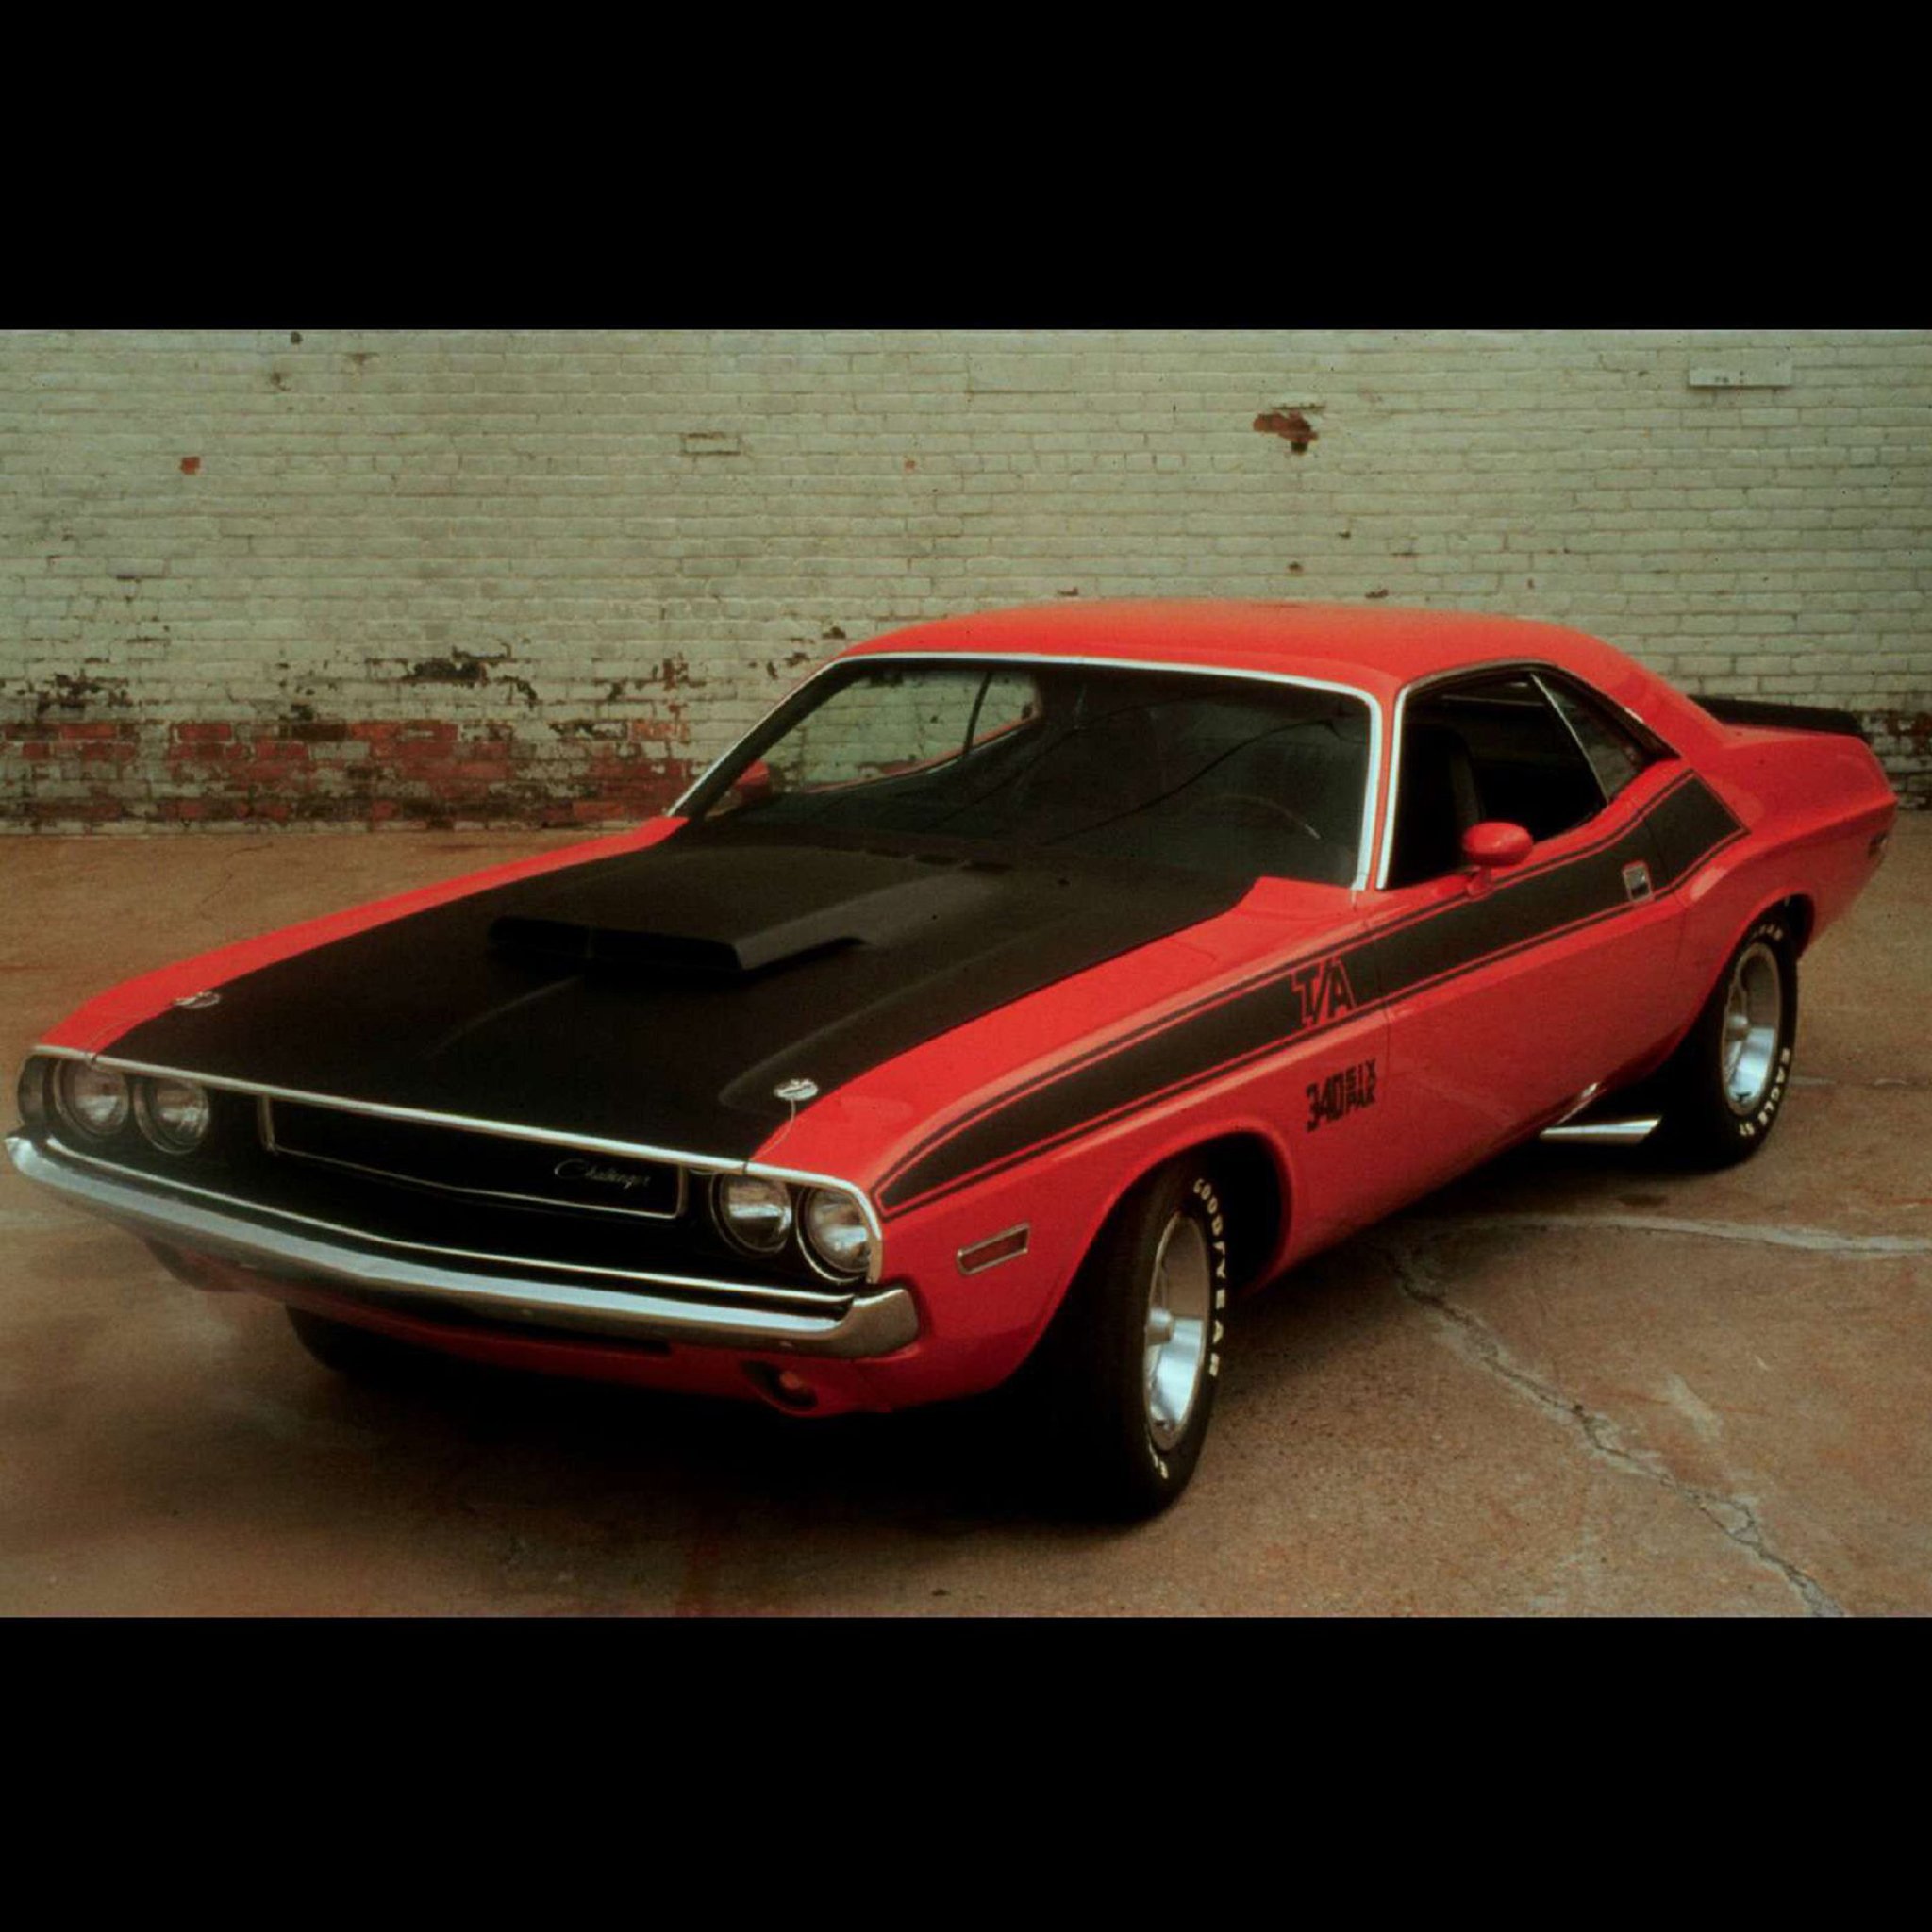 Original: 1970, Old Dodge, Challenger Ta, Car iPad wallpapers and